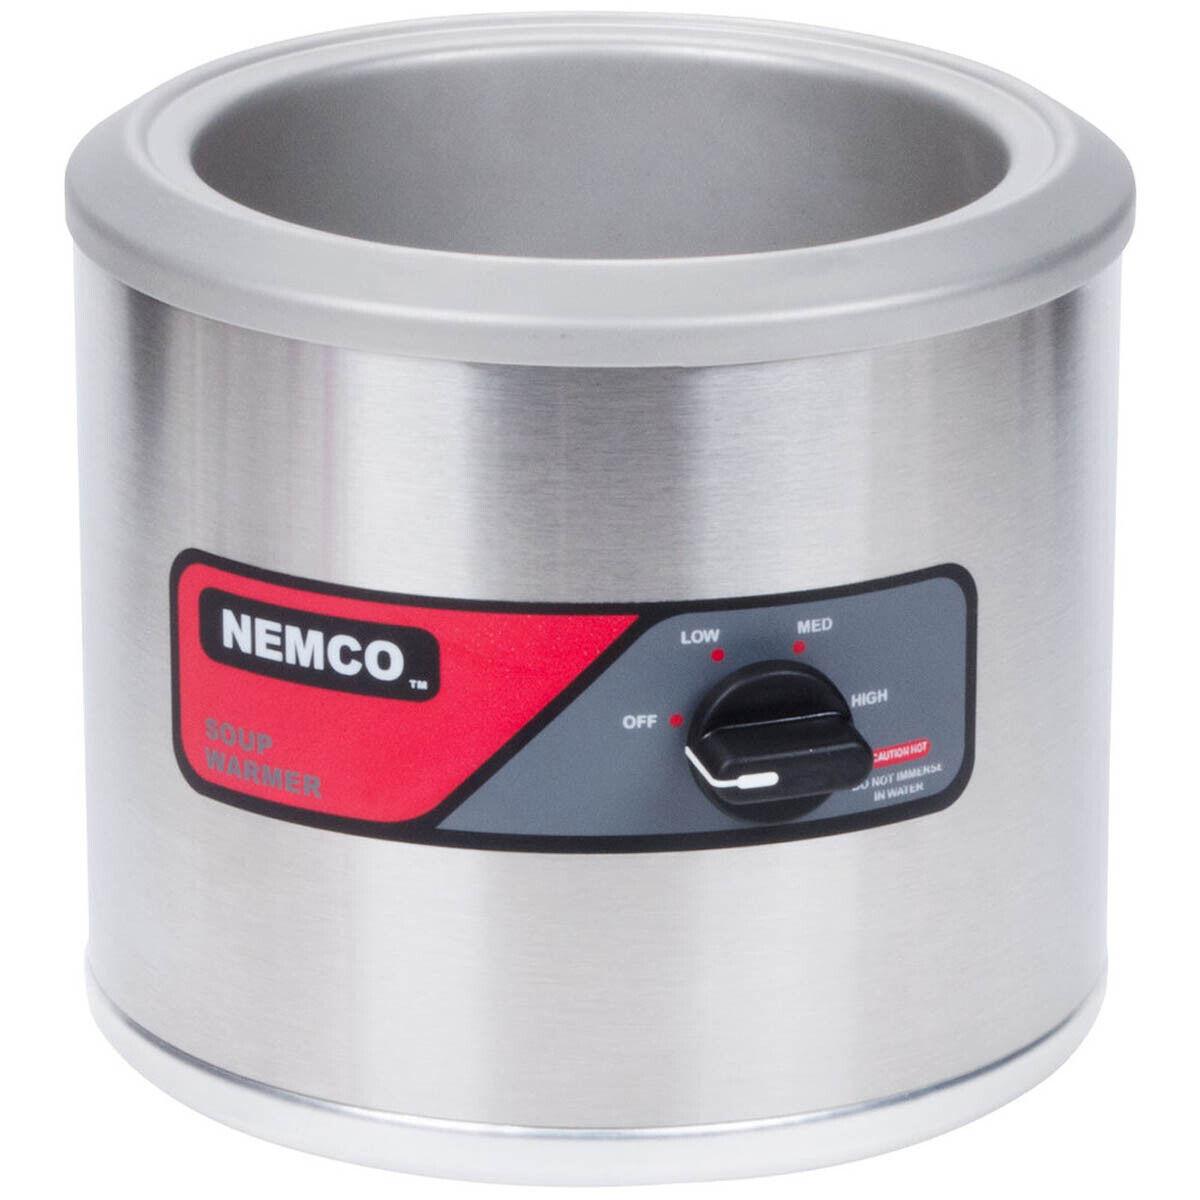 Nemco 6100A Countertop Food Pan Warmer w/ 7-Qt. Capacity, Adjustable Thermost...